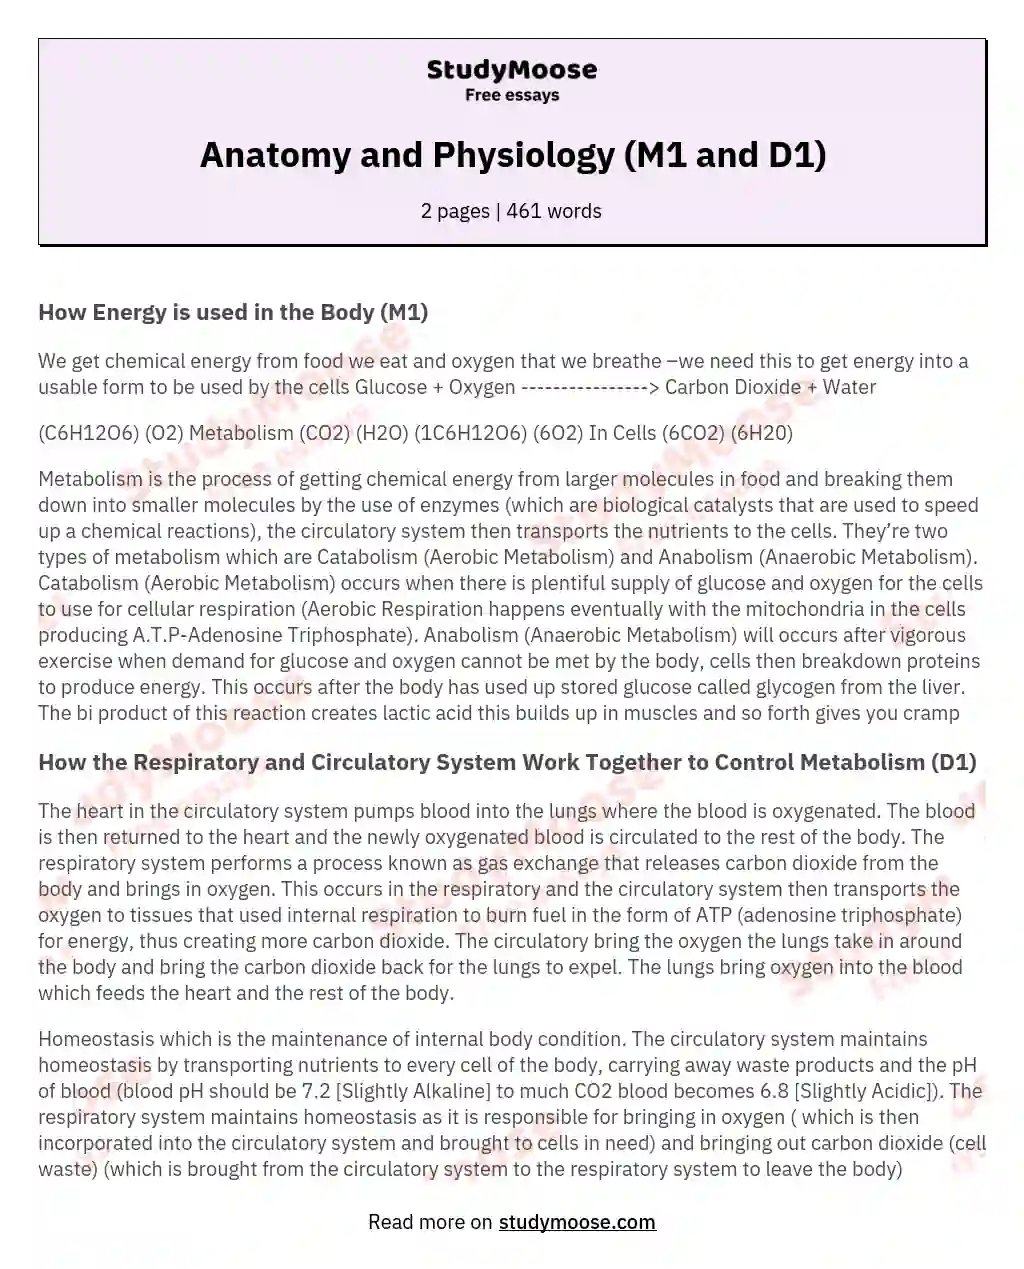 Anatomy and Physiology (M1 and D1)